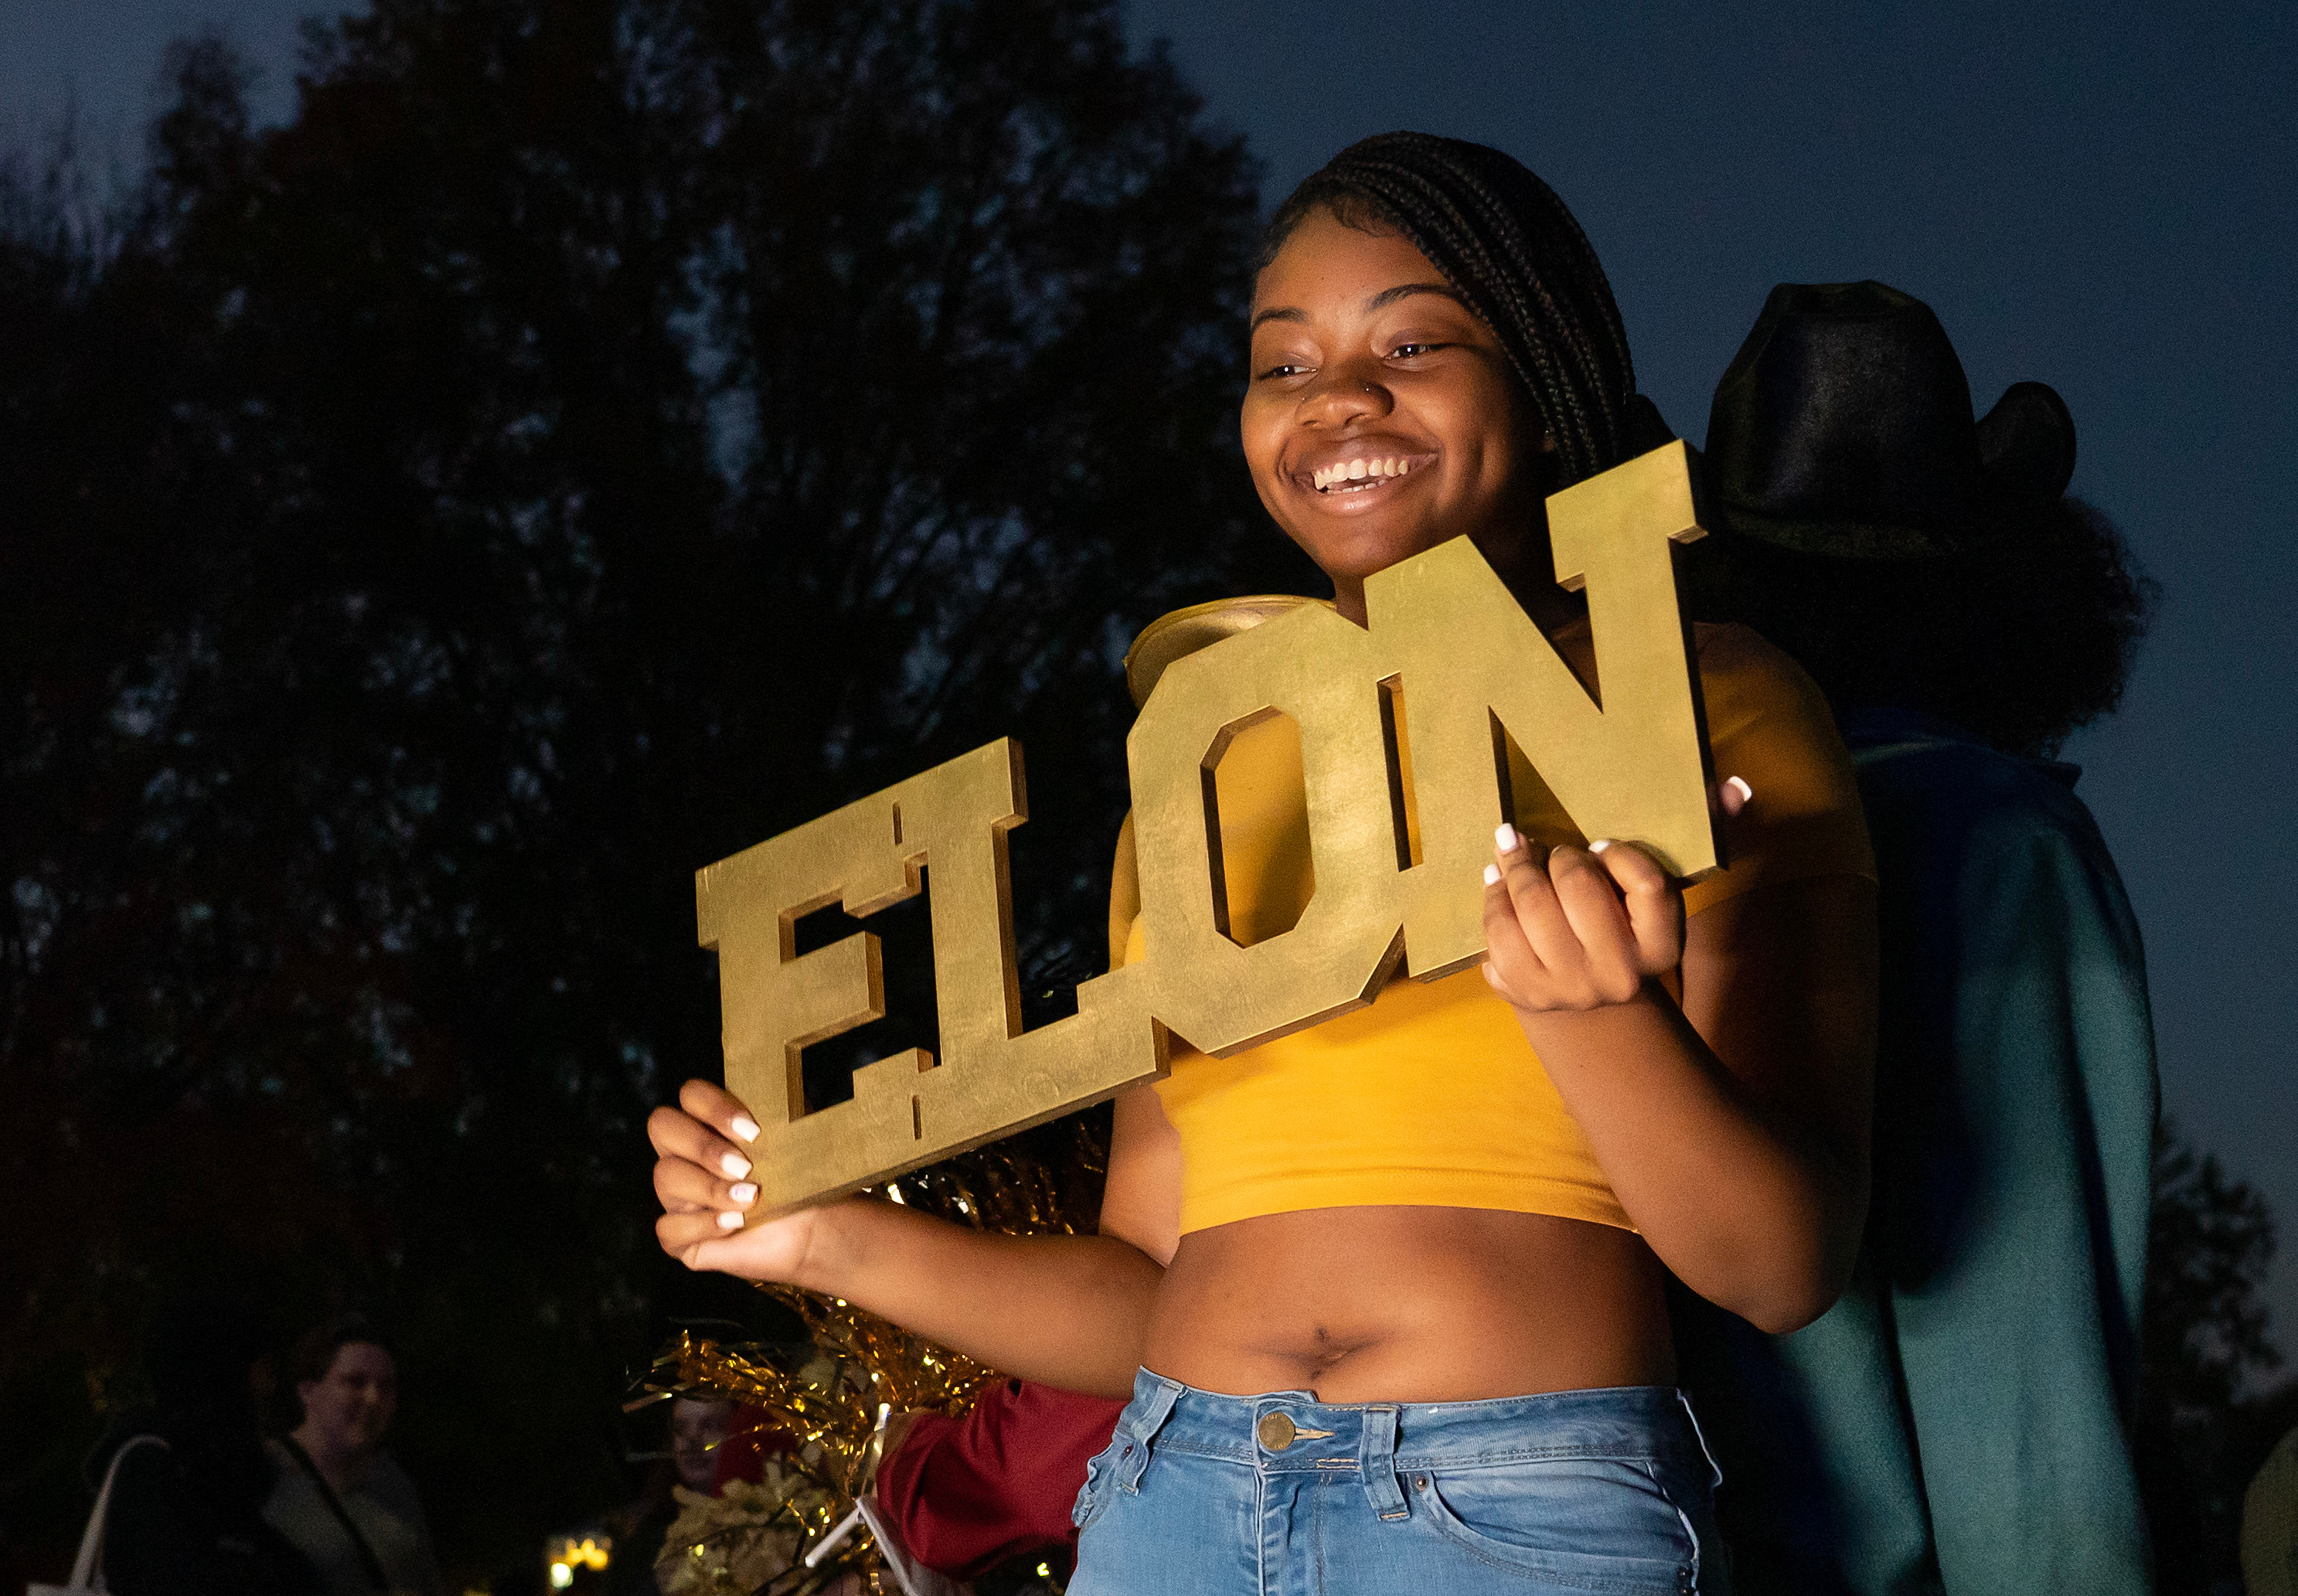 Smiling woman holding "Elon" sign